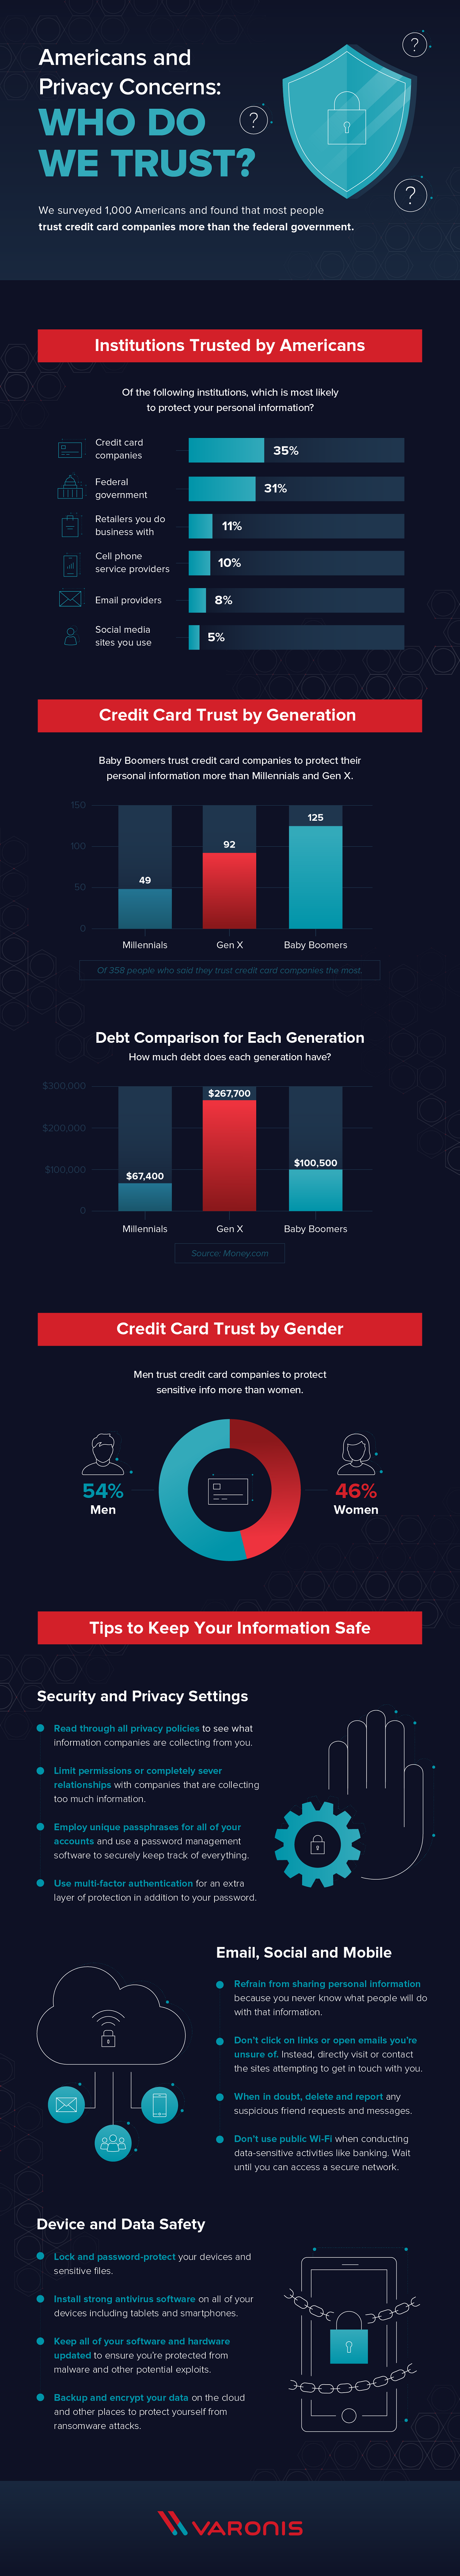 Americans and Privacy Concerns: Who Do We Trust? #infographic